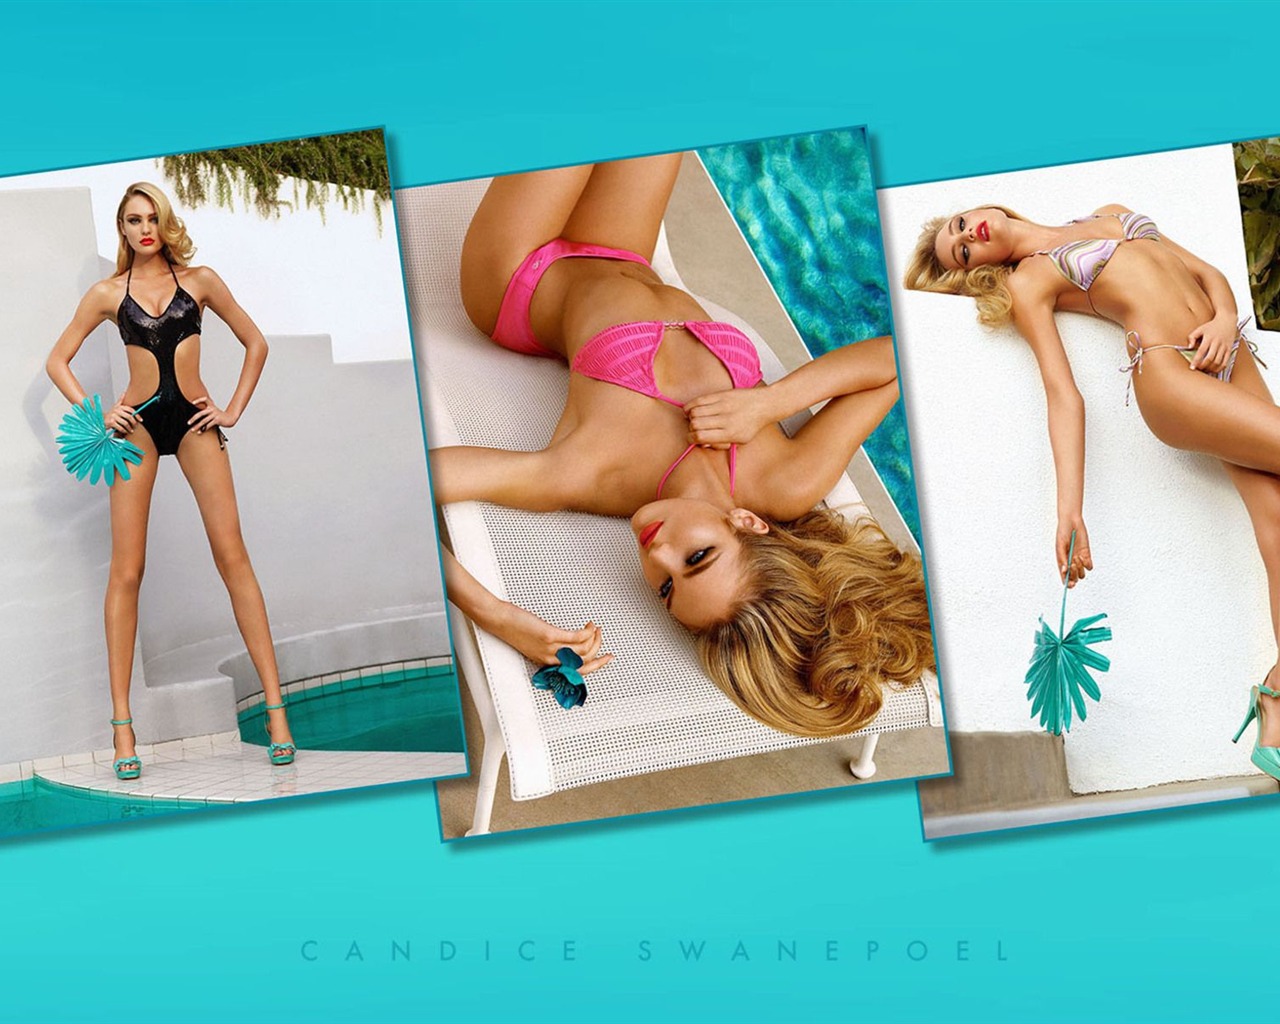 Candice Swanepoel #017 - 1280x1024 Wallpapers Pictures Photos Images